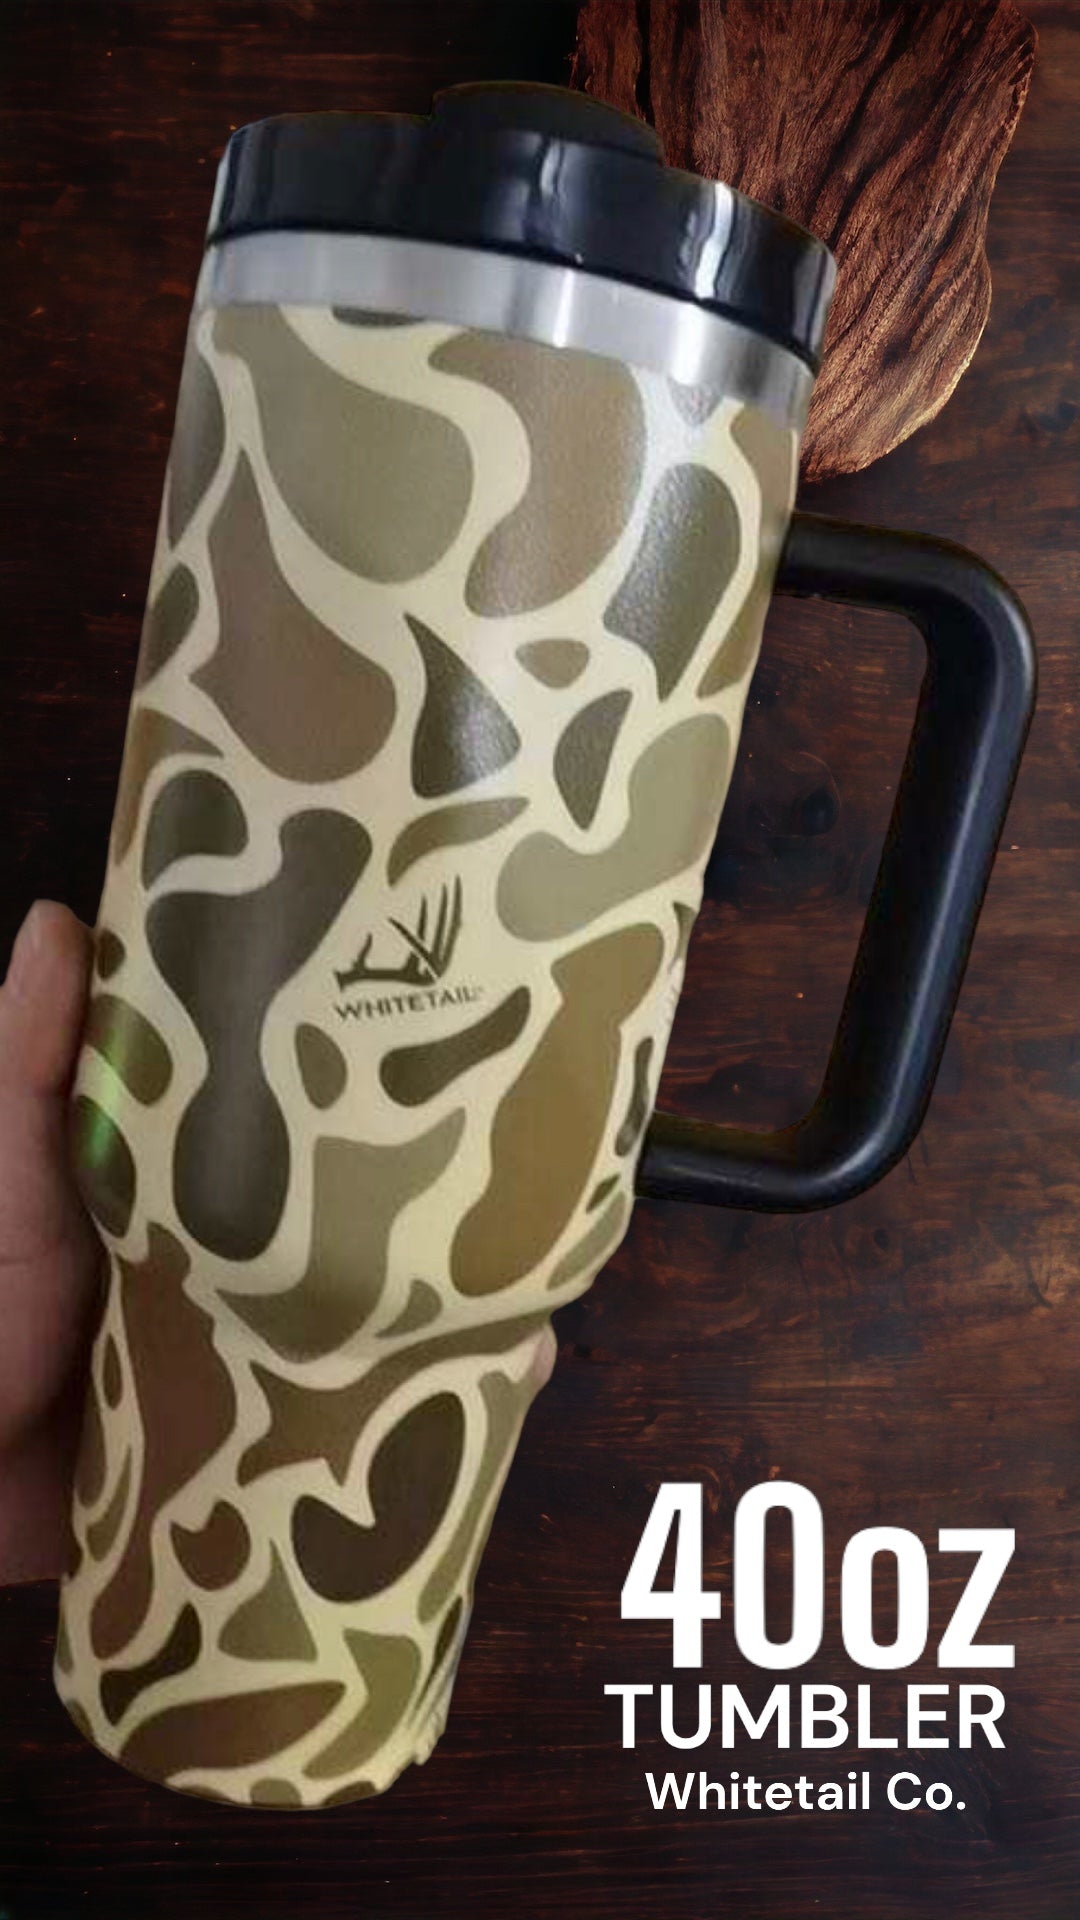 Yeti Just Dropped an All-New Camo Tumbler, and You Don't Want to